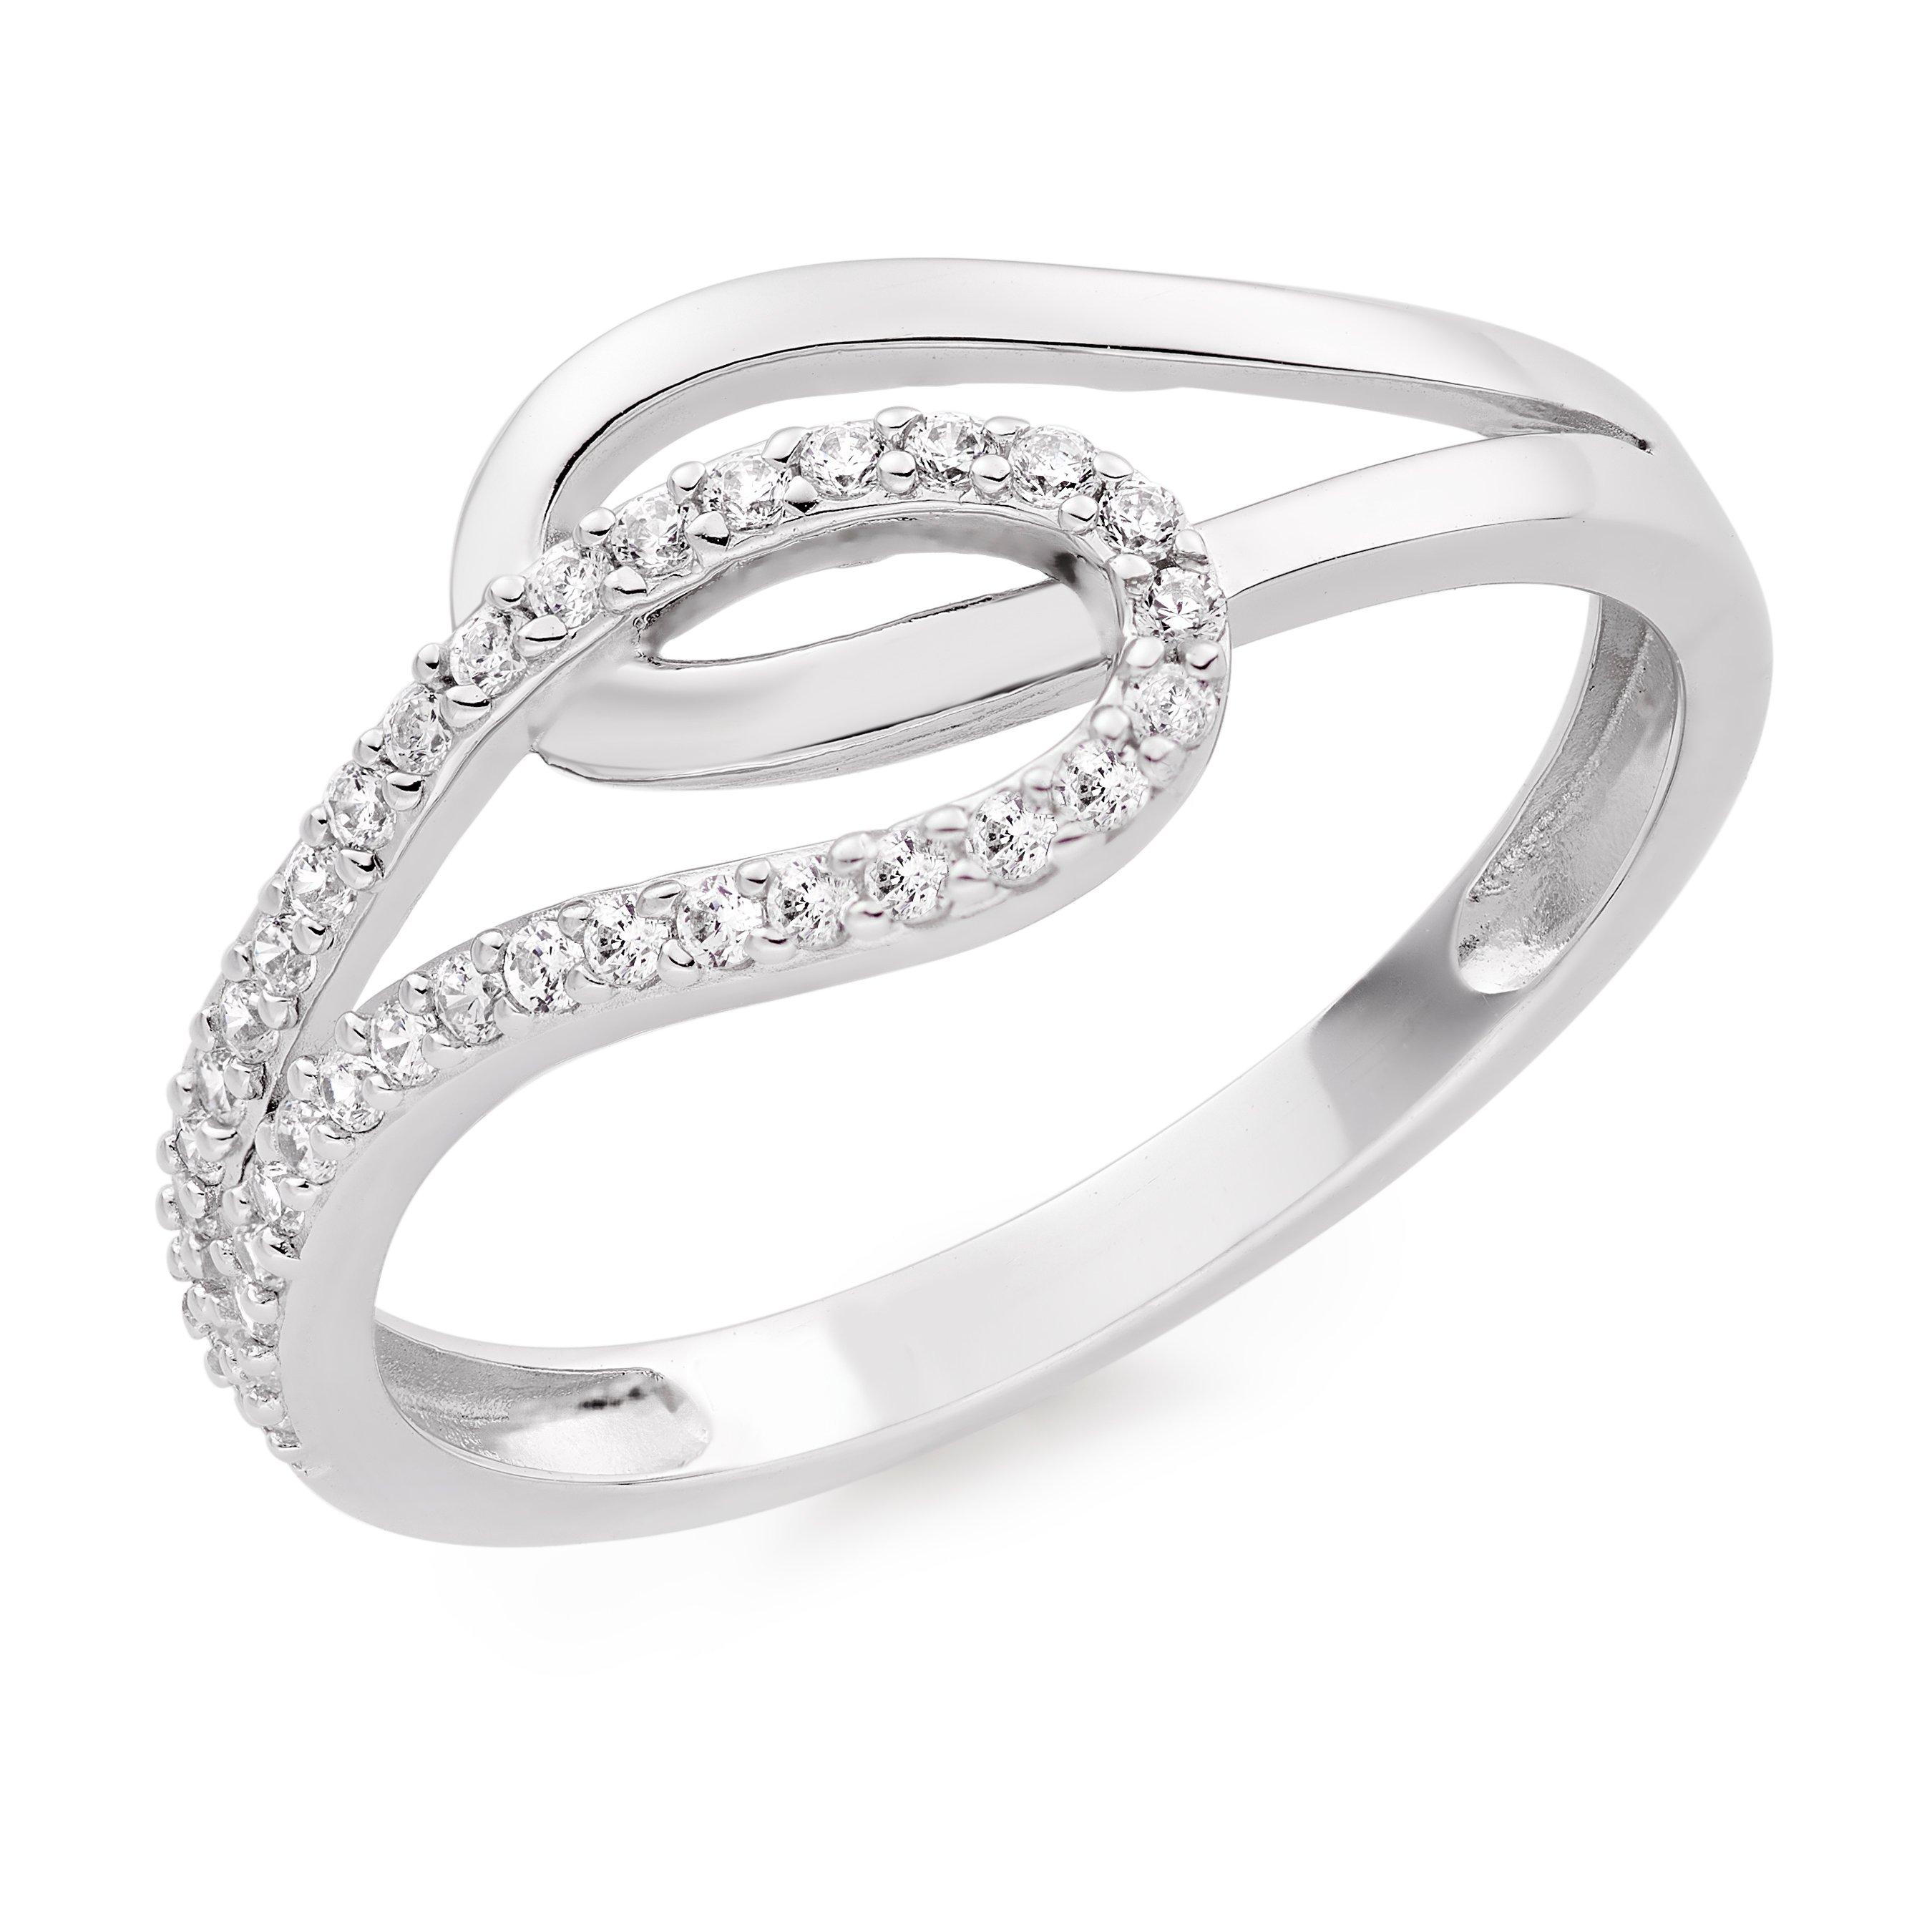 Silver Cubic Zirconia Crossover Ring | 0136933 | Beaverbrooks the Jewellers